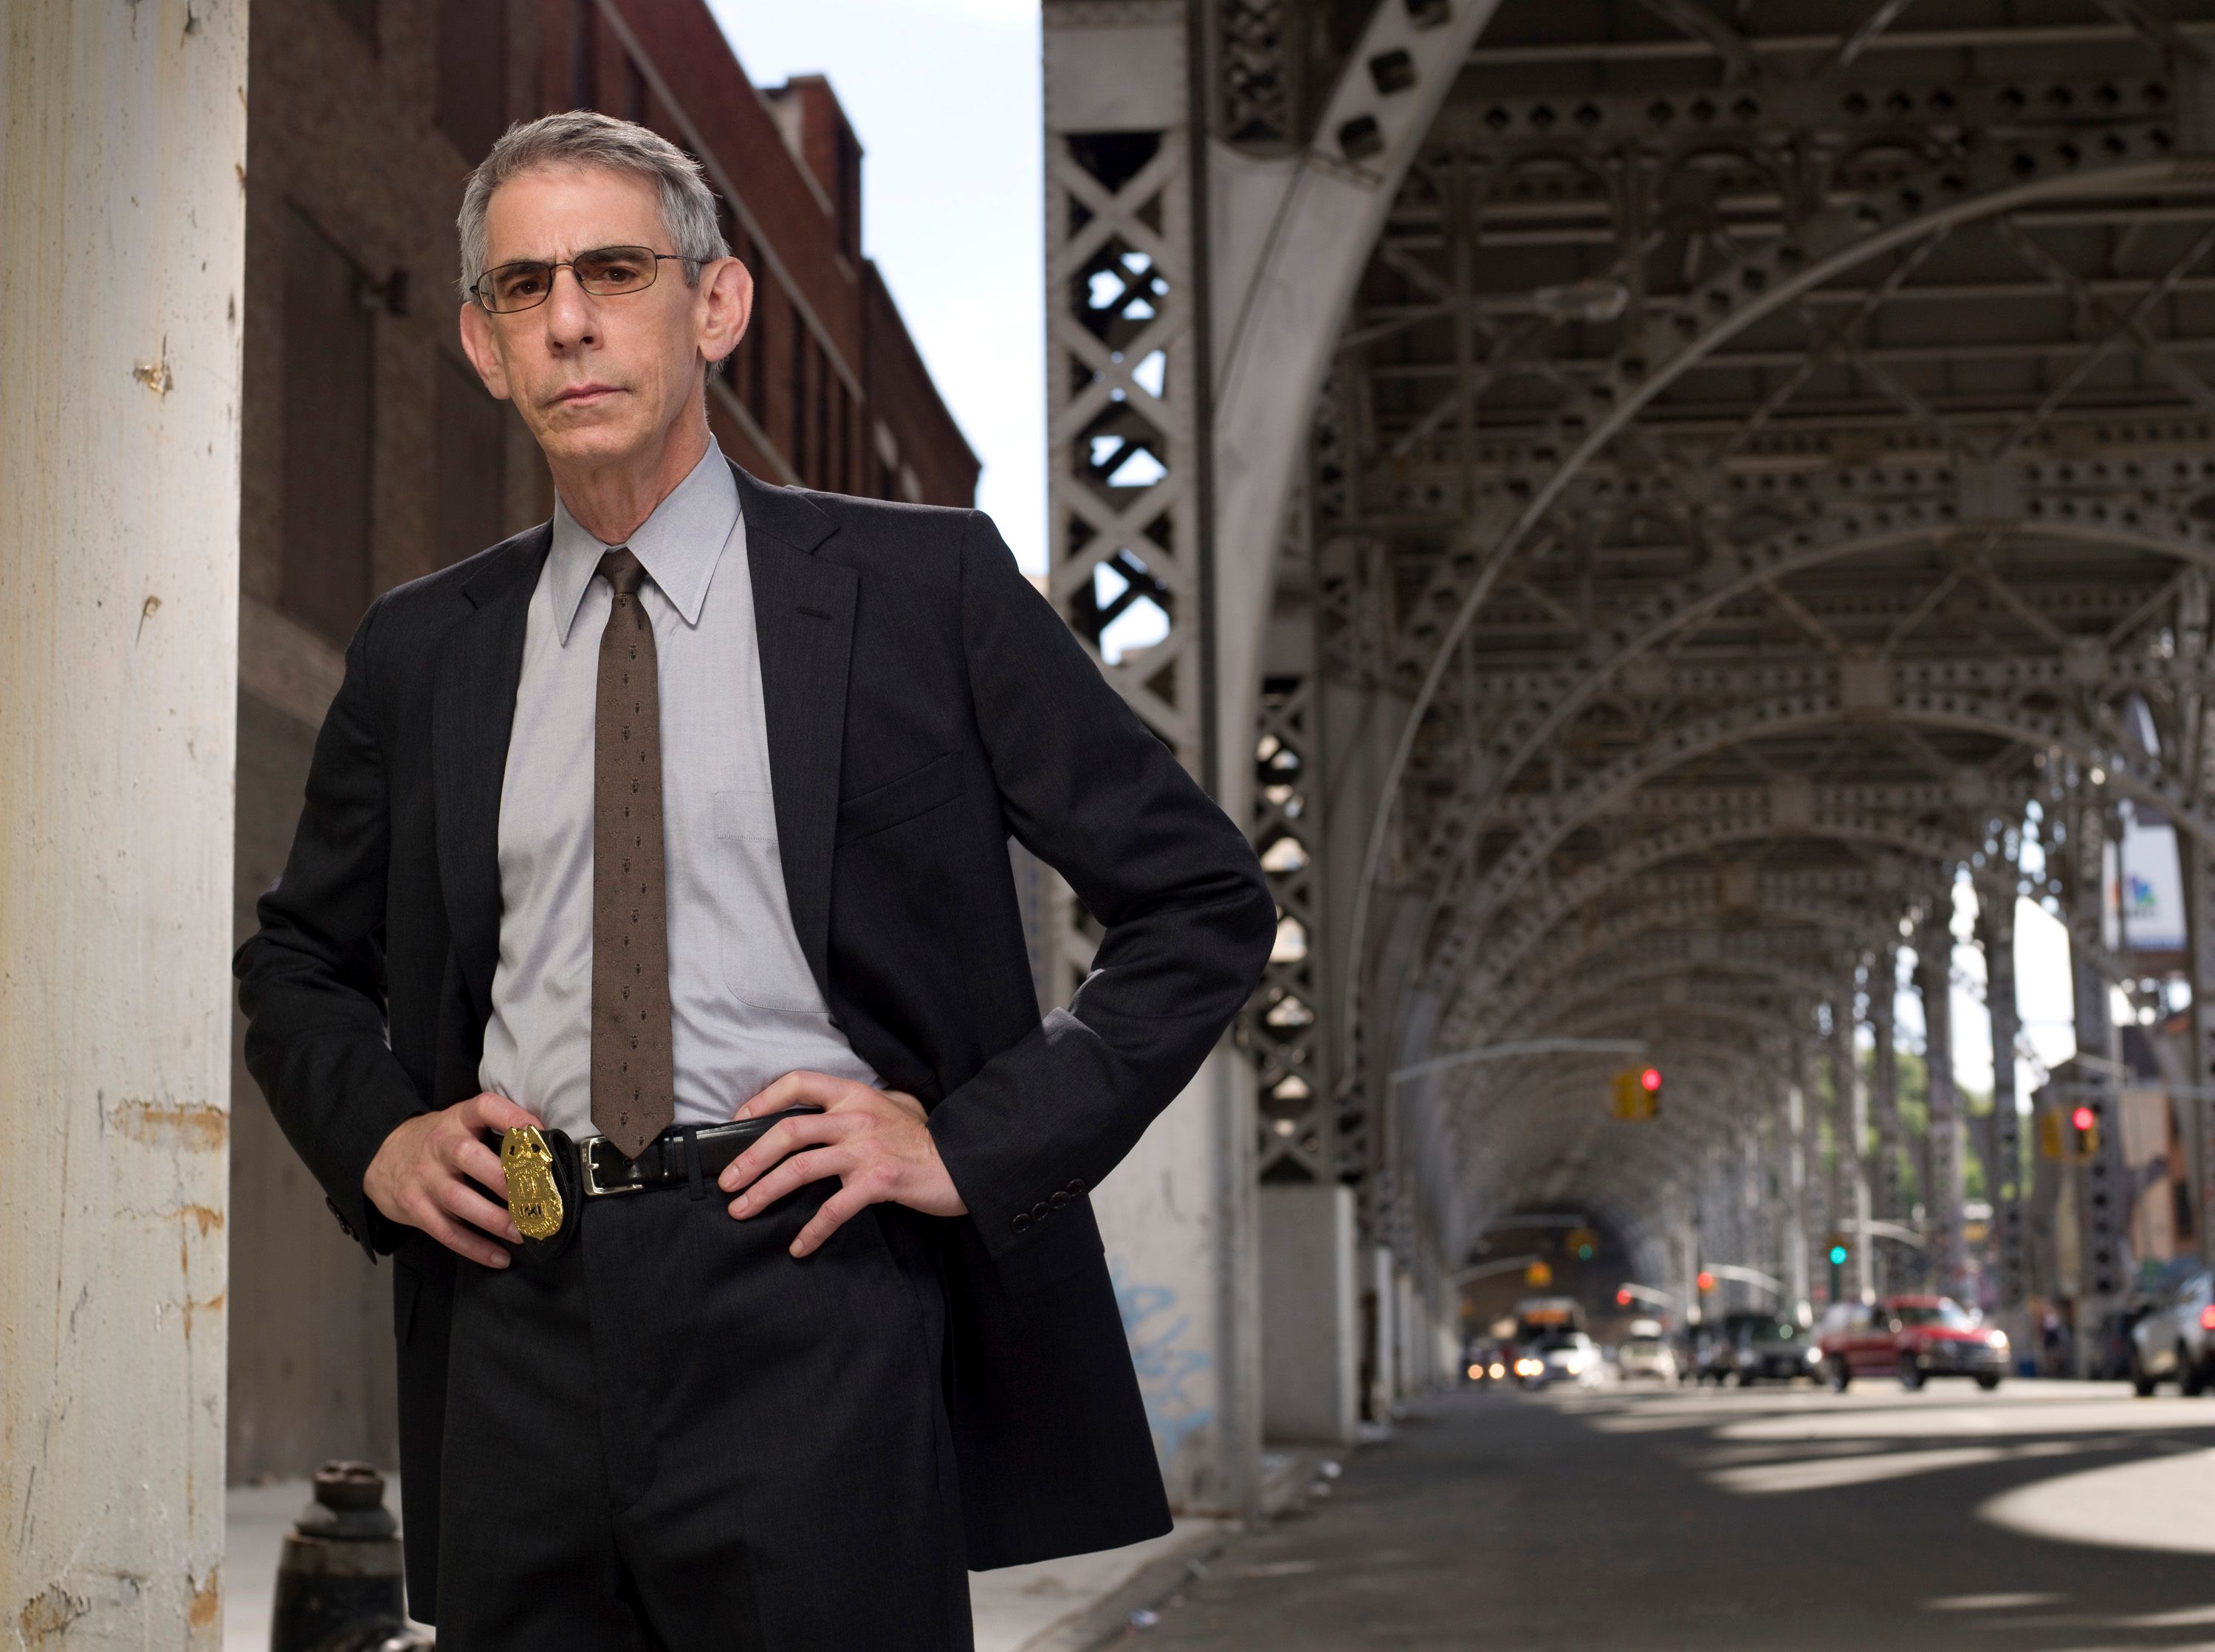 Richard Belzer as Detective John Munch on "Law & Order" Season 10. | Source: Getty Images